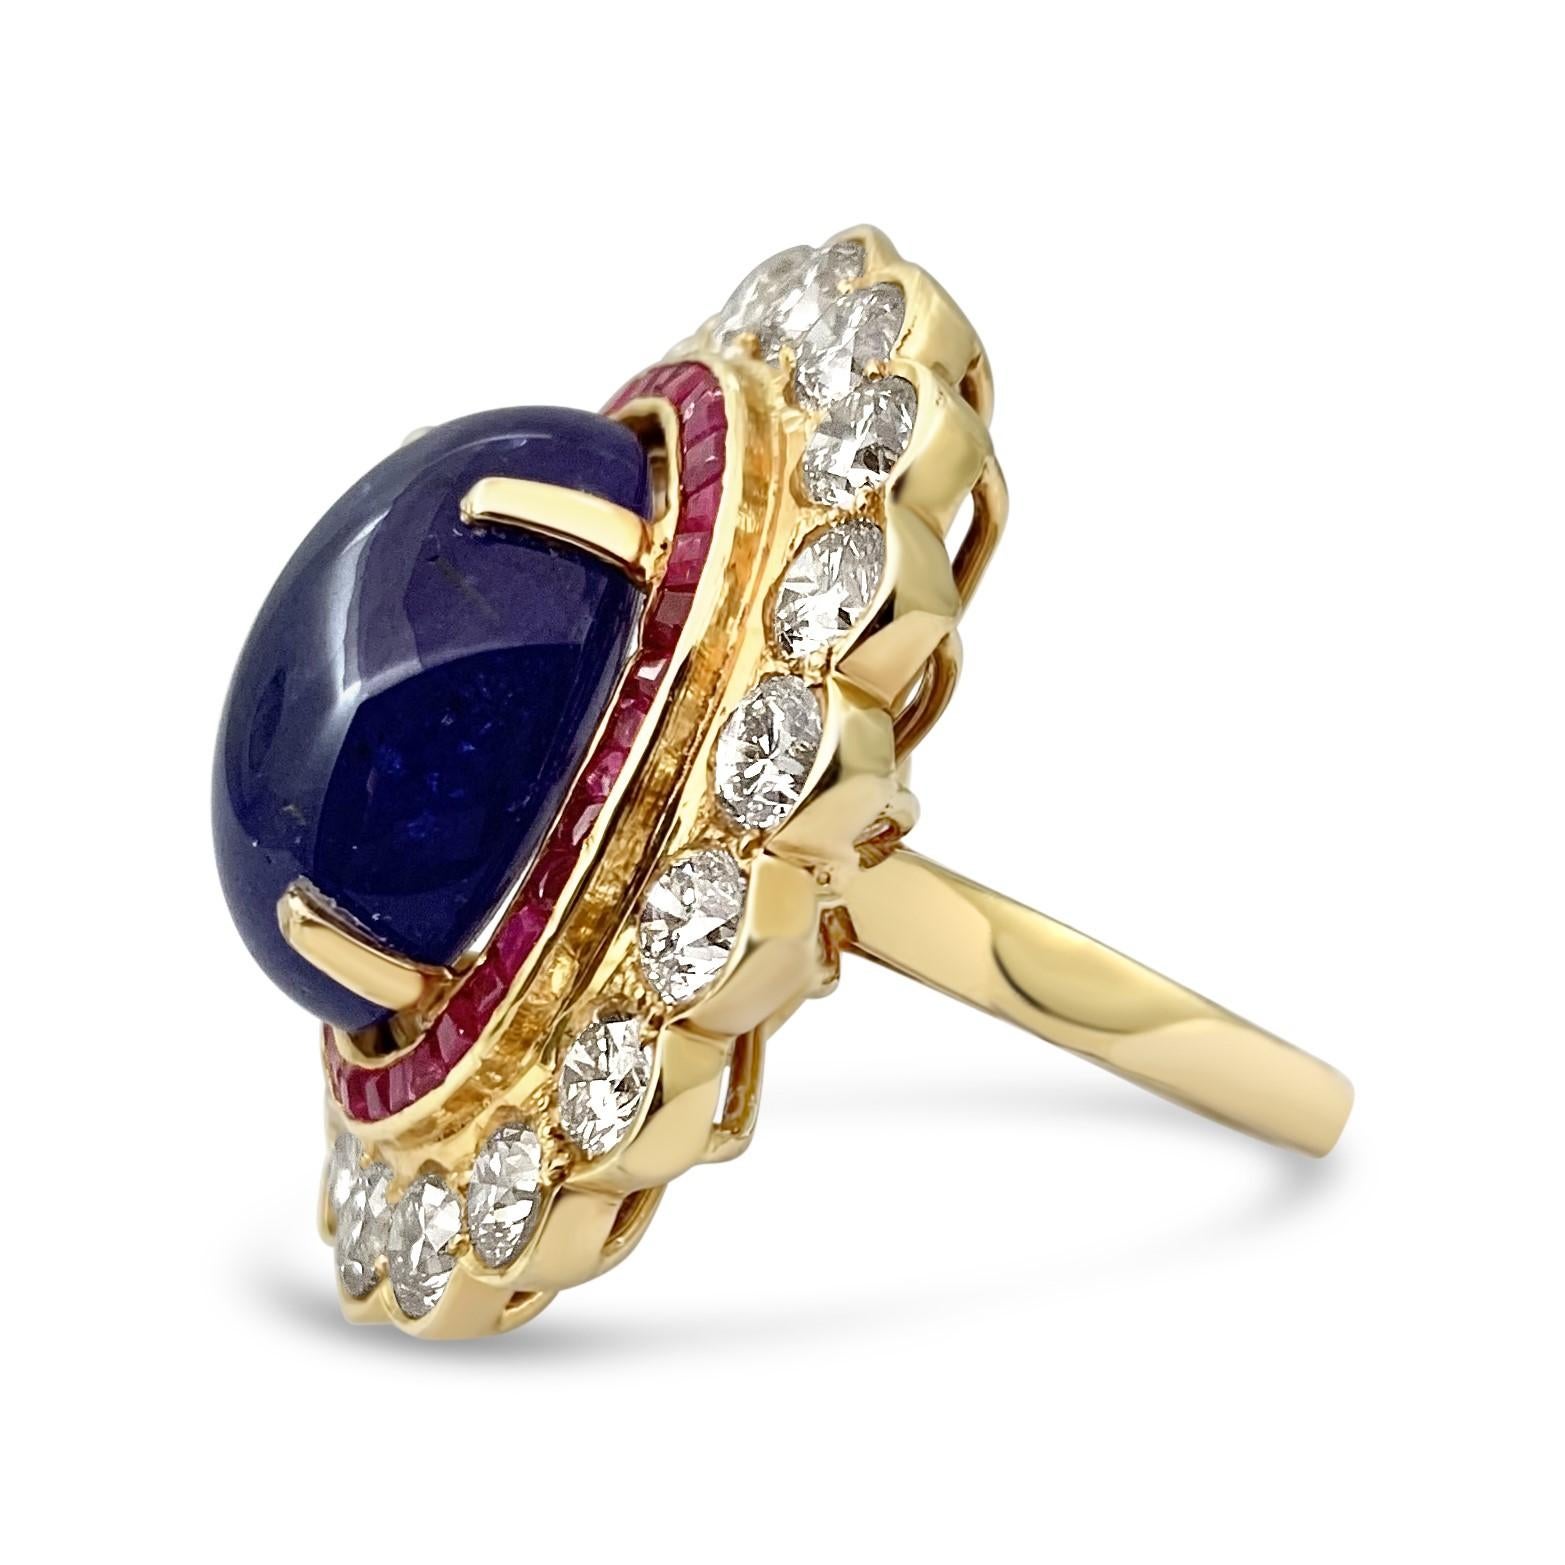 Introducing our exquisite 19.61 Carat Tanzanite Ring with a Ruby and White Diamond Halo, a true masterpiece of jewelry that elegantly showcases the mesmerizing beauty of tanzanite, accented by the rich allure of rubies and the brilliance of white